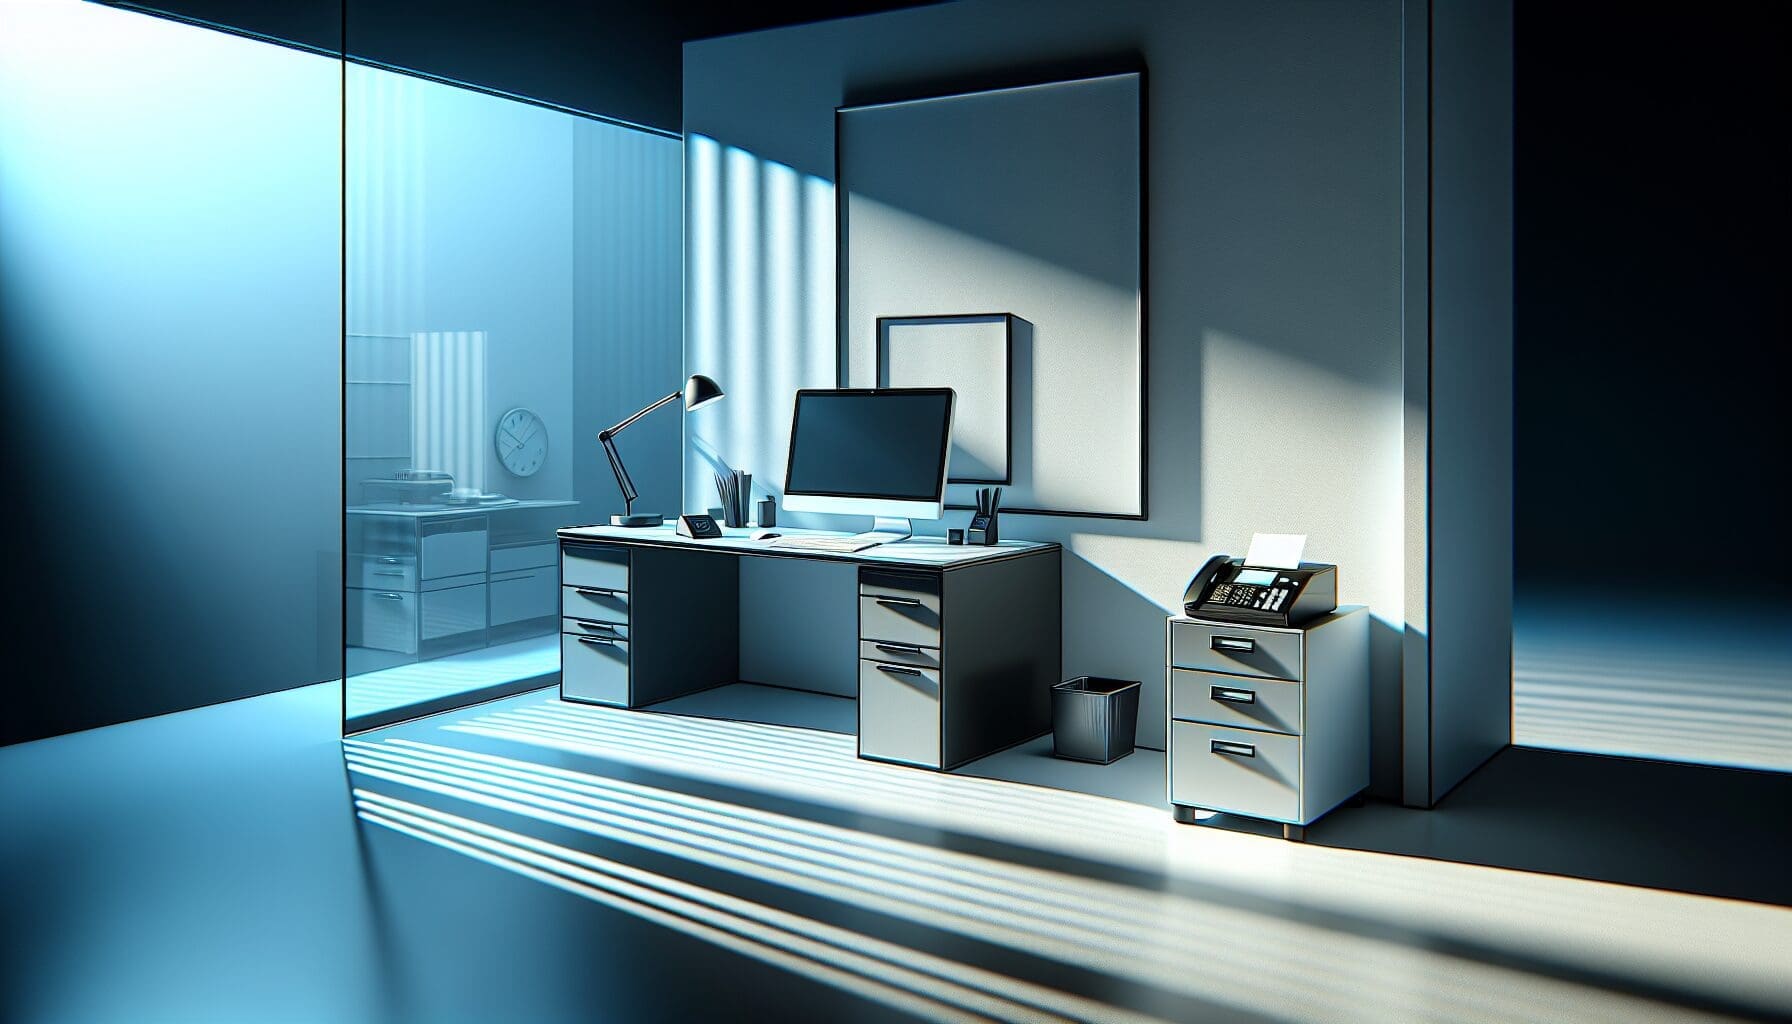 Illustration of a modern office with a computer and a fax machine